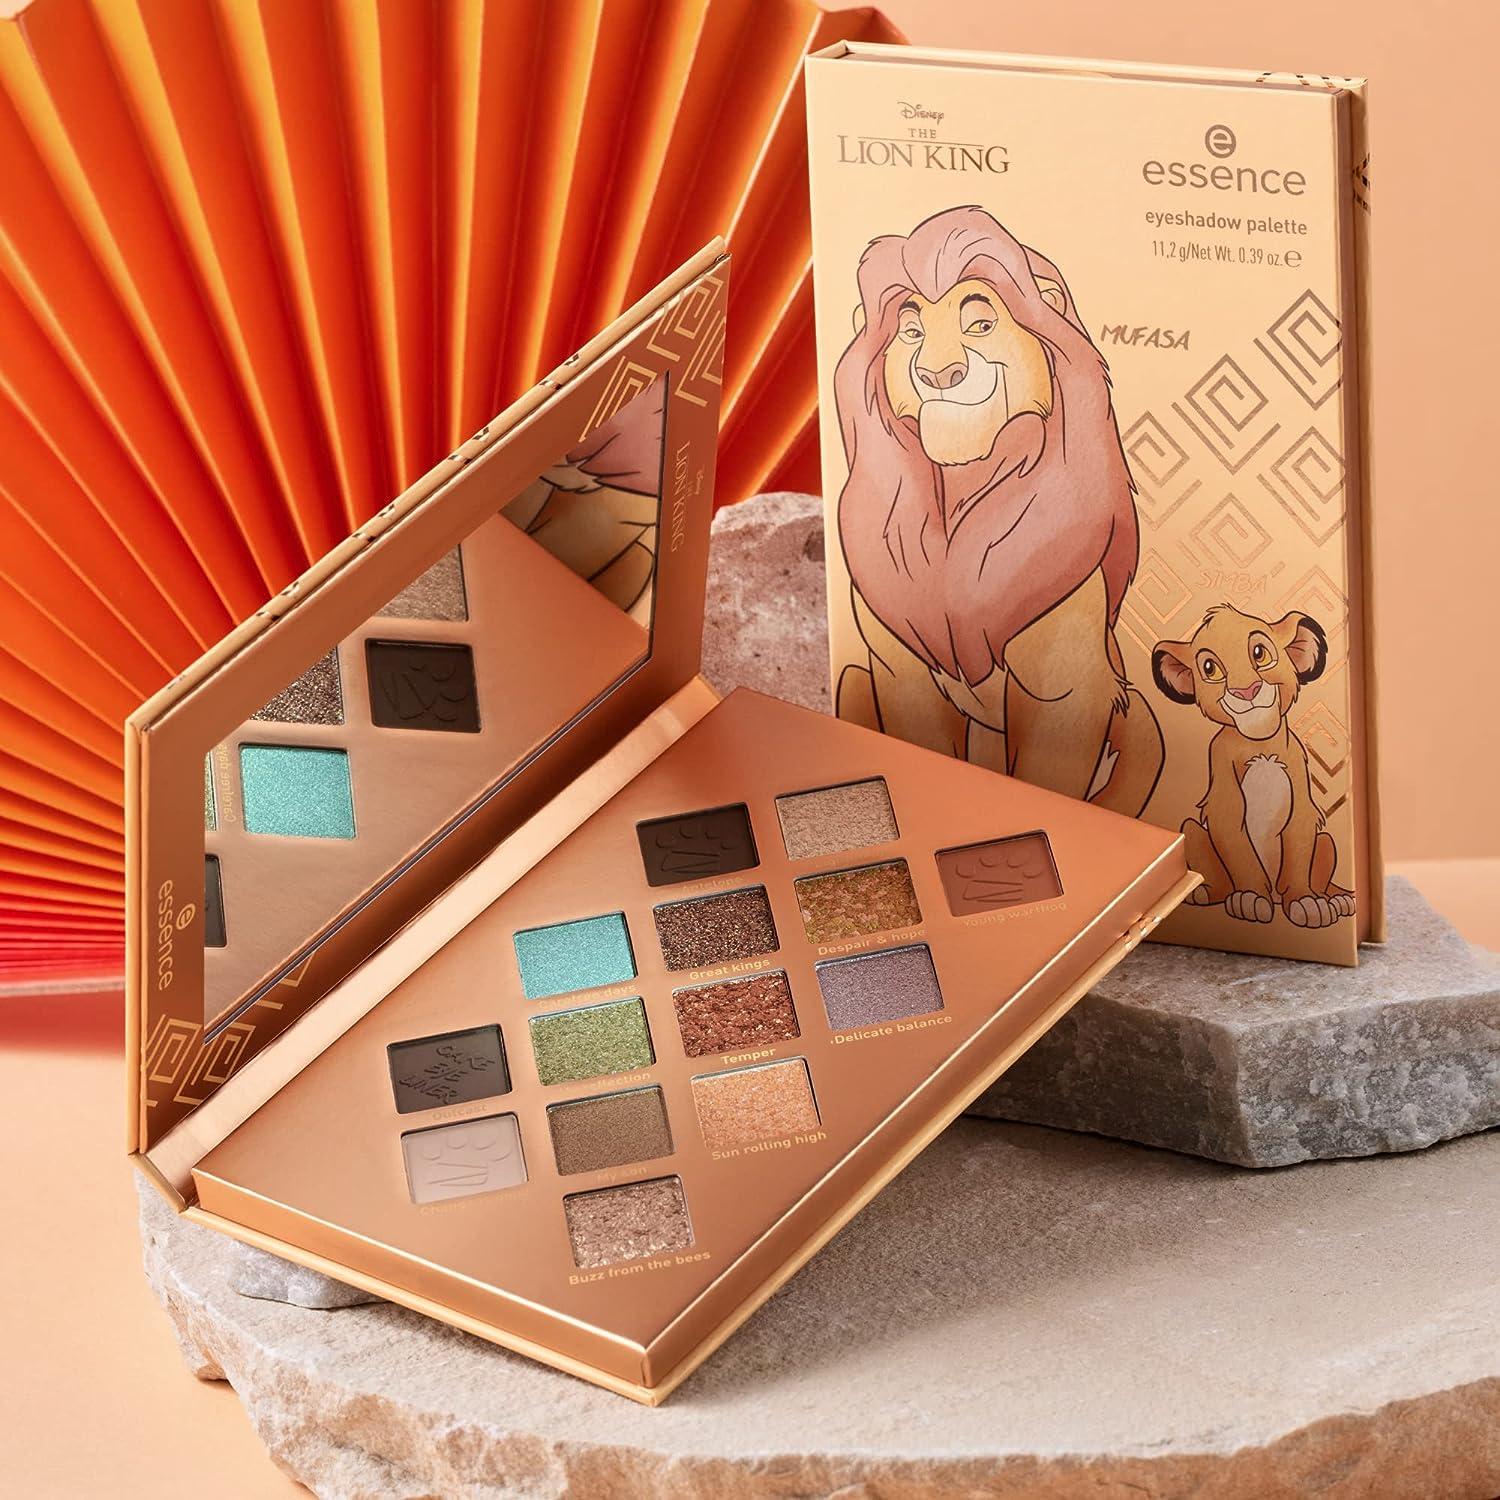 & Collection Easy Vegan Cruelty Paraben Pigmented | Palette King Matte Free Limited | | Blend essence | Eyeshadow Edition Highly & | Metallic 14 Oil Lion to Disney The Shadows |